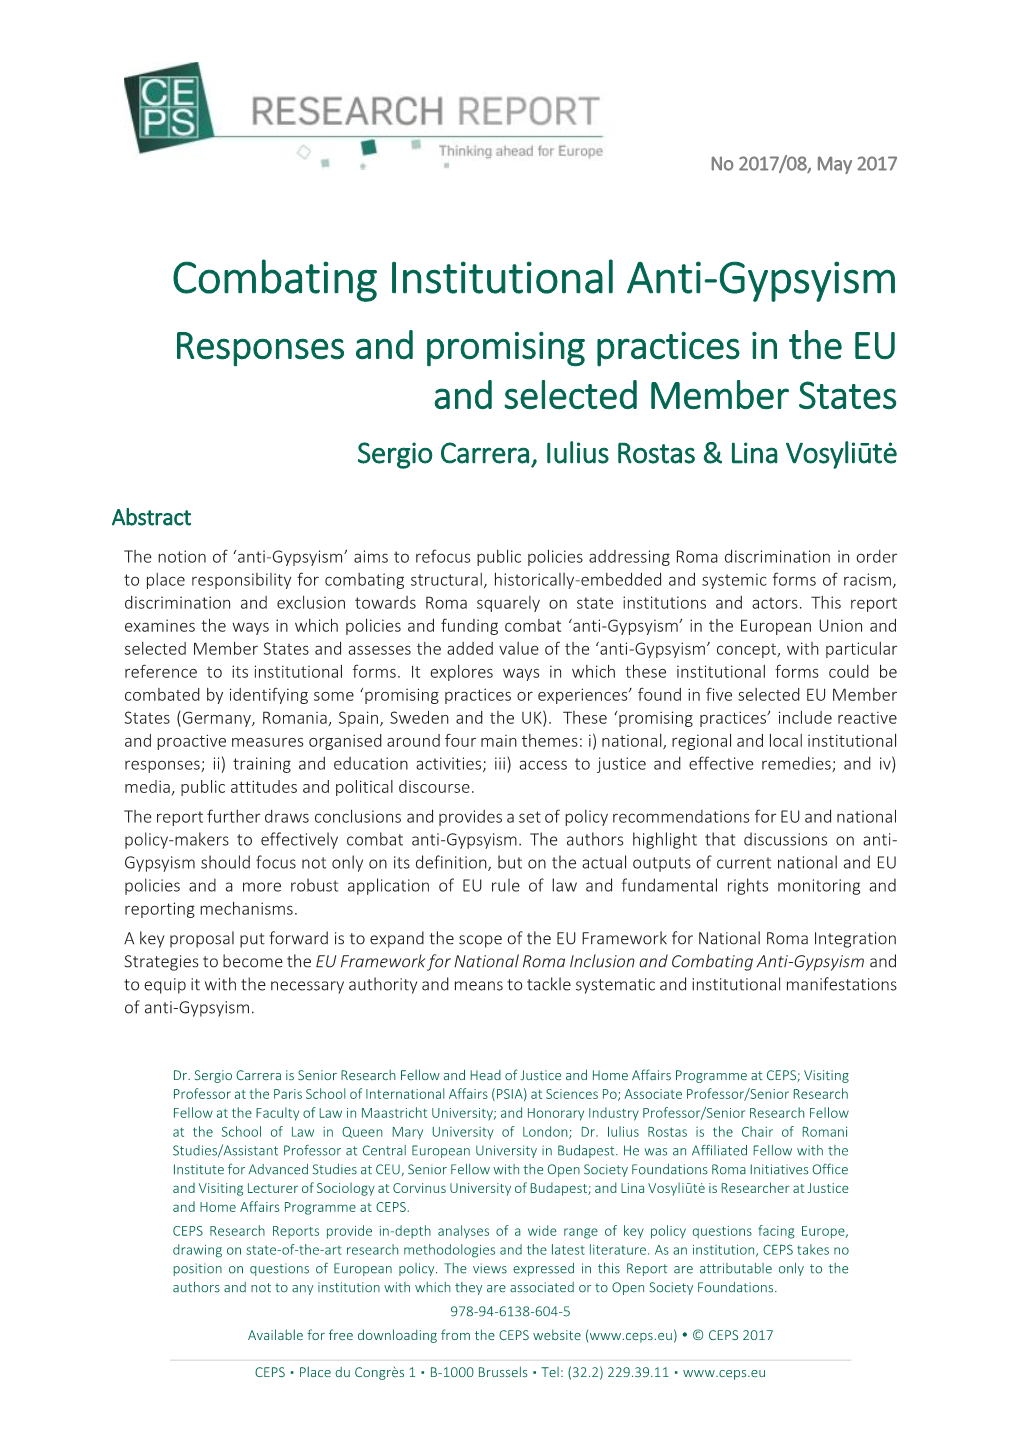 Combating Institutional Anti-Gypsyism Responses and Promising Practices in the EU and Selected Member States Sergio Carrera, Iulius Rostas & Lina Vosyliūtė